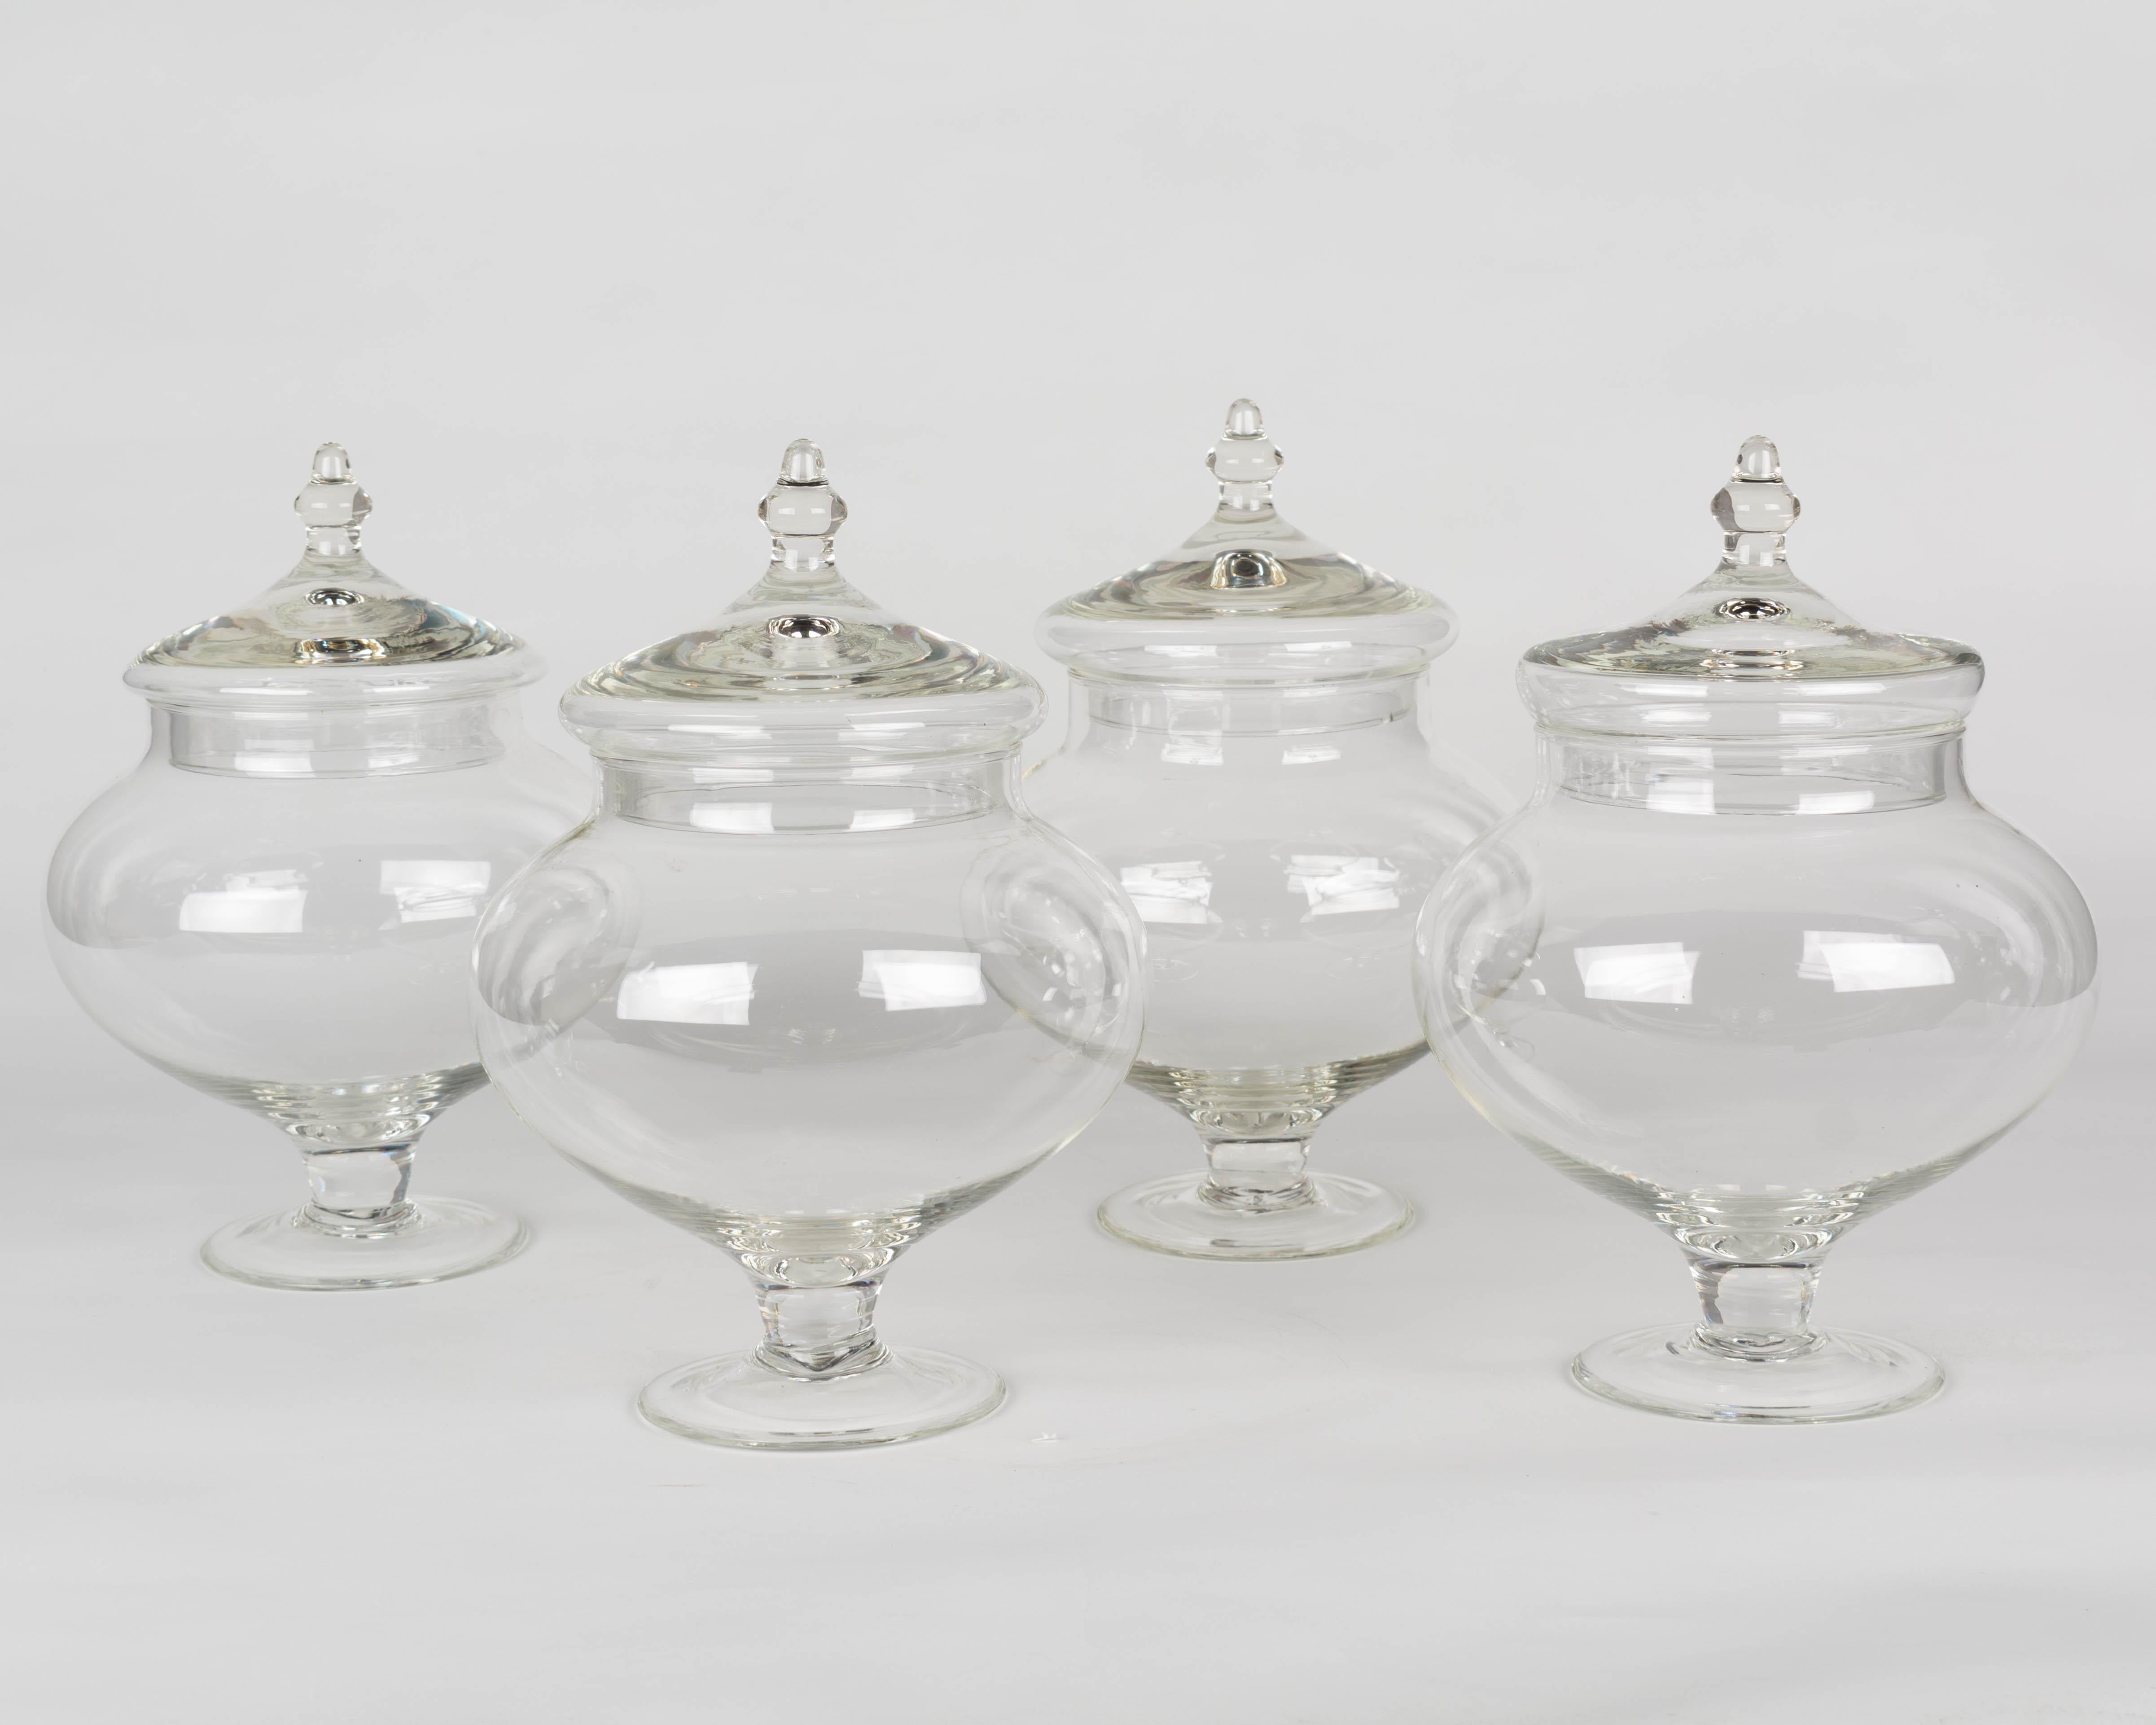 A set of four French blown glass lidded apothecary or candy jars. Smooth form with pedestal base and decorative knob on lid. Light weight, perfect for jelly beans or for use as bathroom canister. Purchased from a confiserie, or sweet shop, along